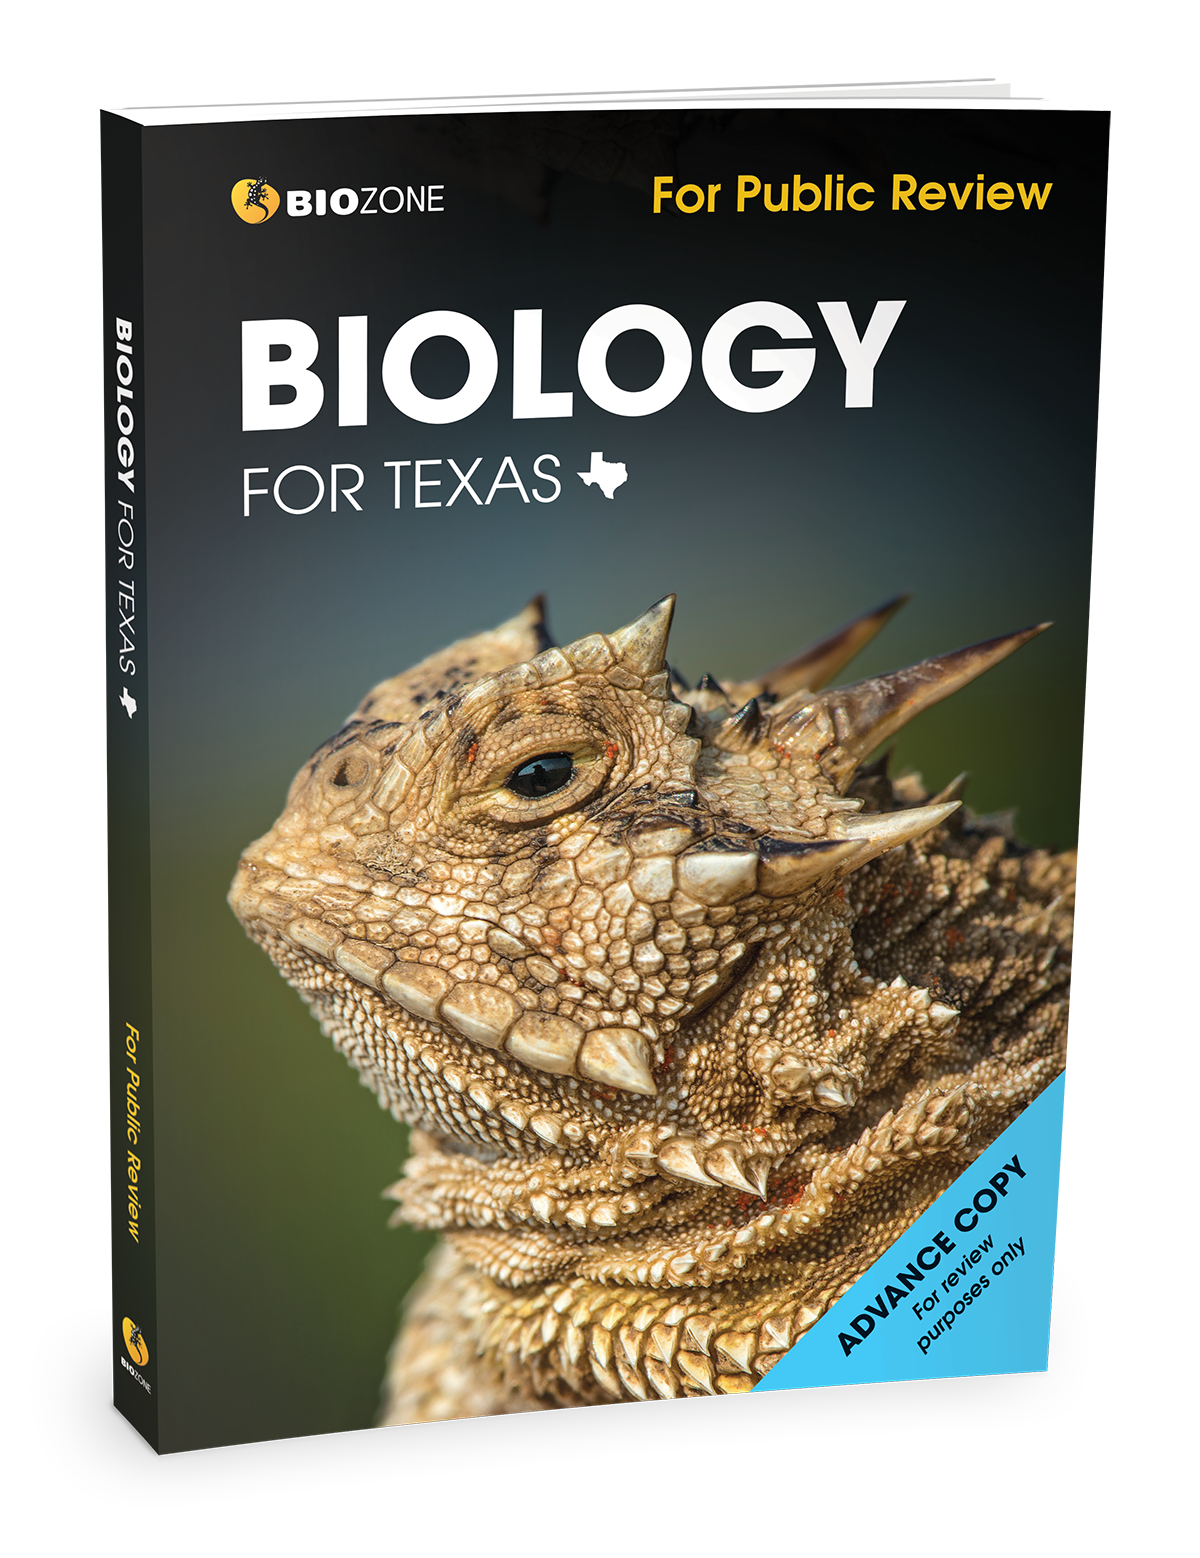 Biology for Texas public review cover